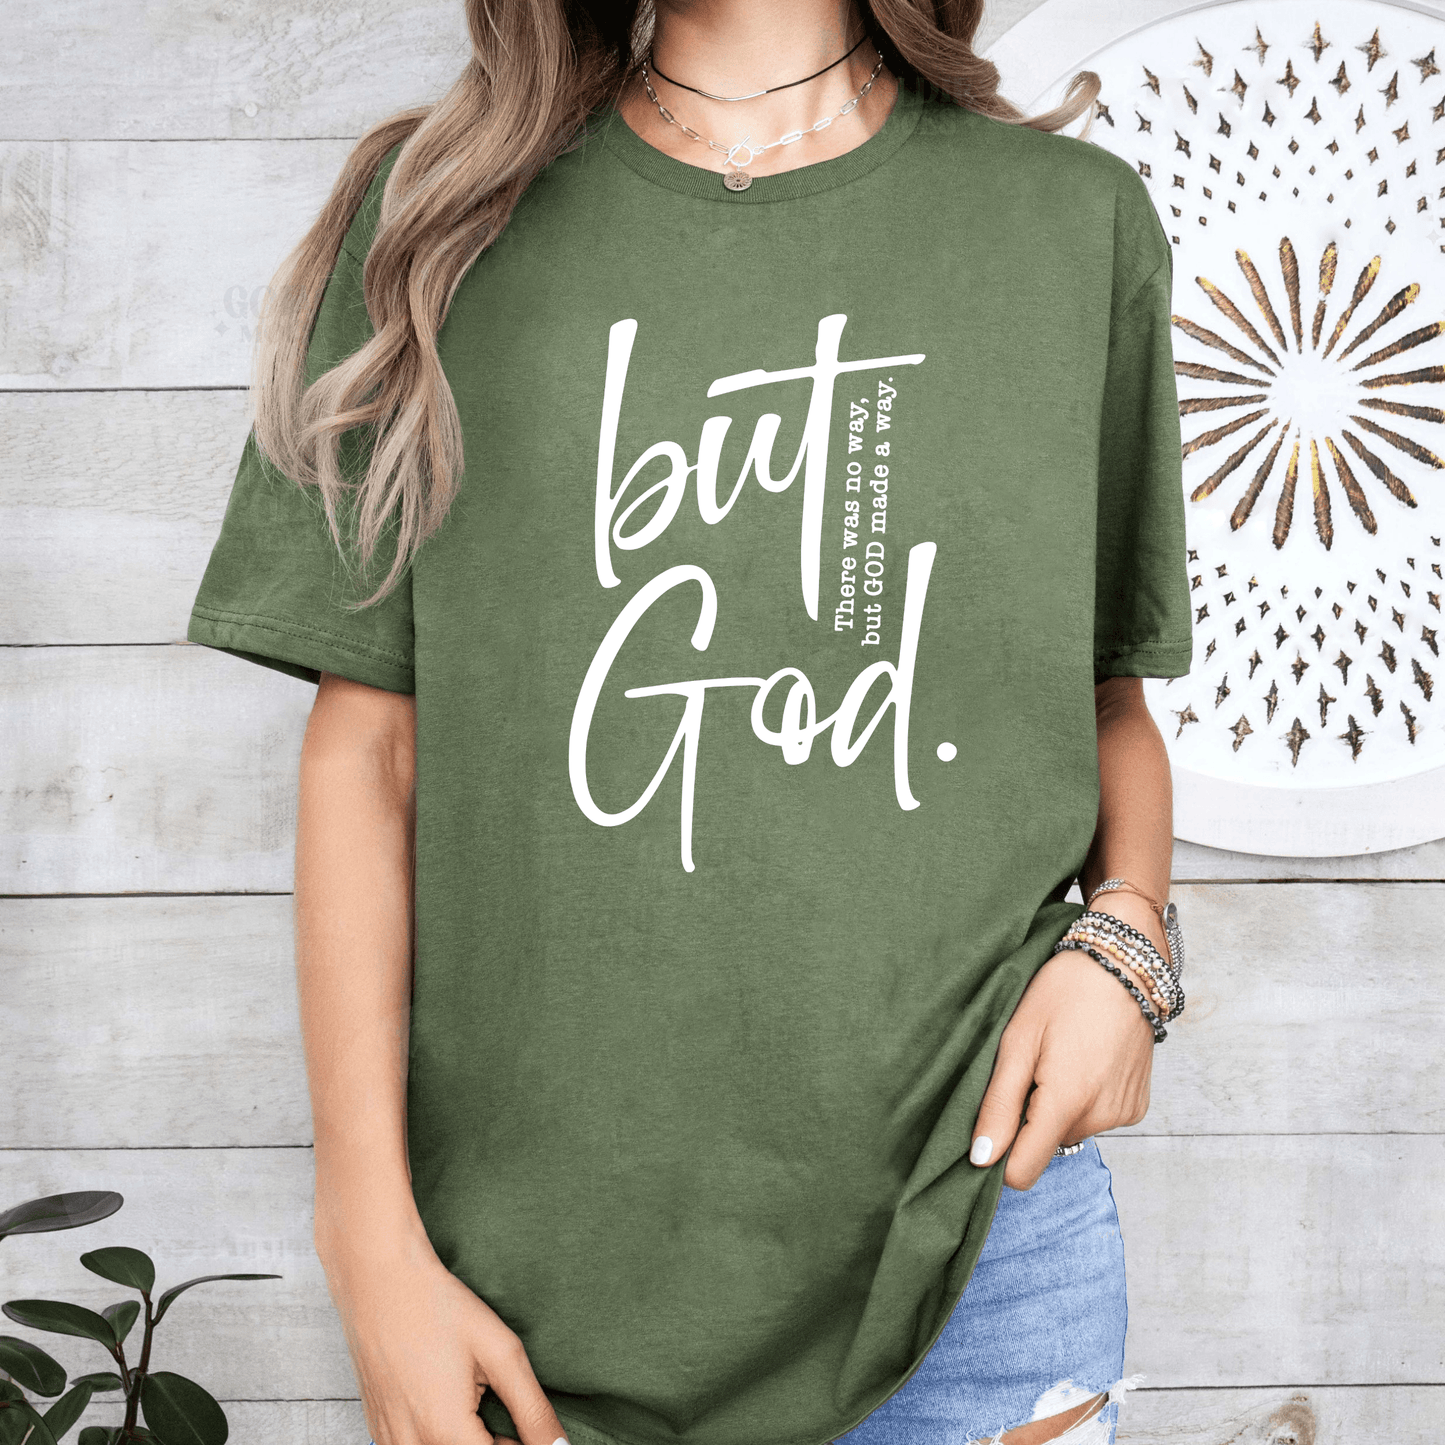 'But God' - Faith Declaration and Inspiration - Gift for Christians - GiftHaus